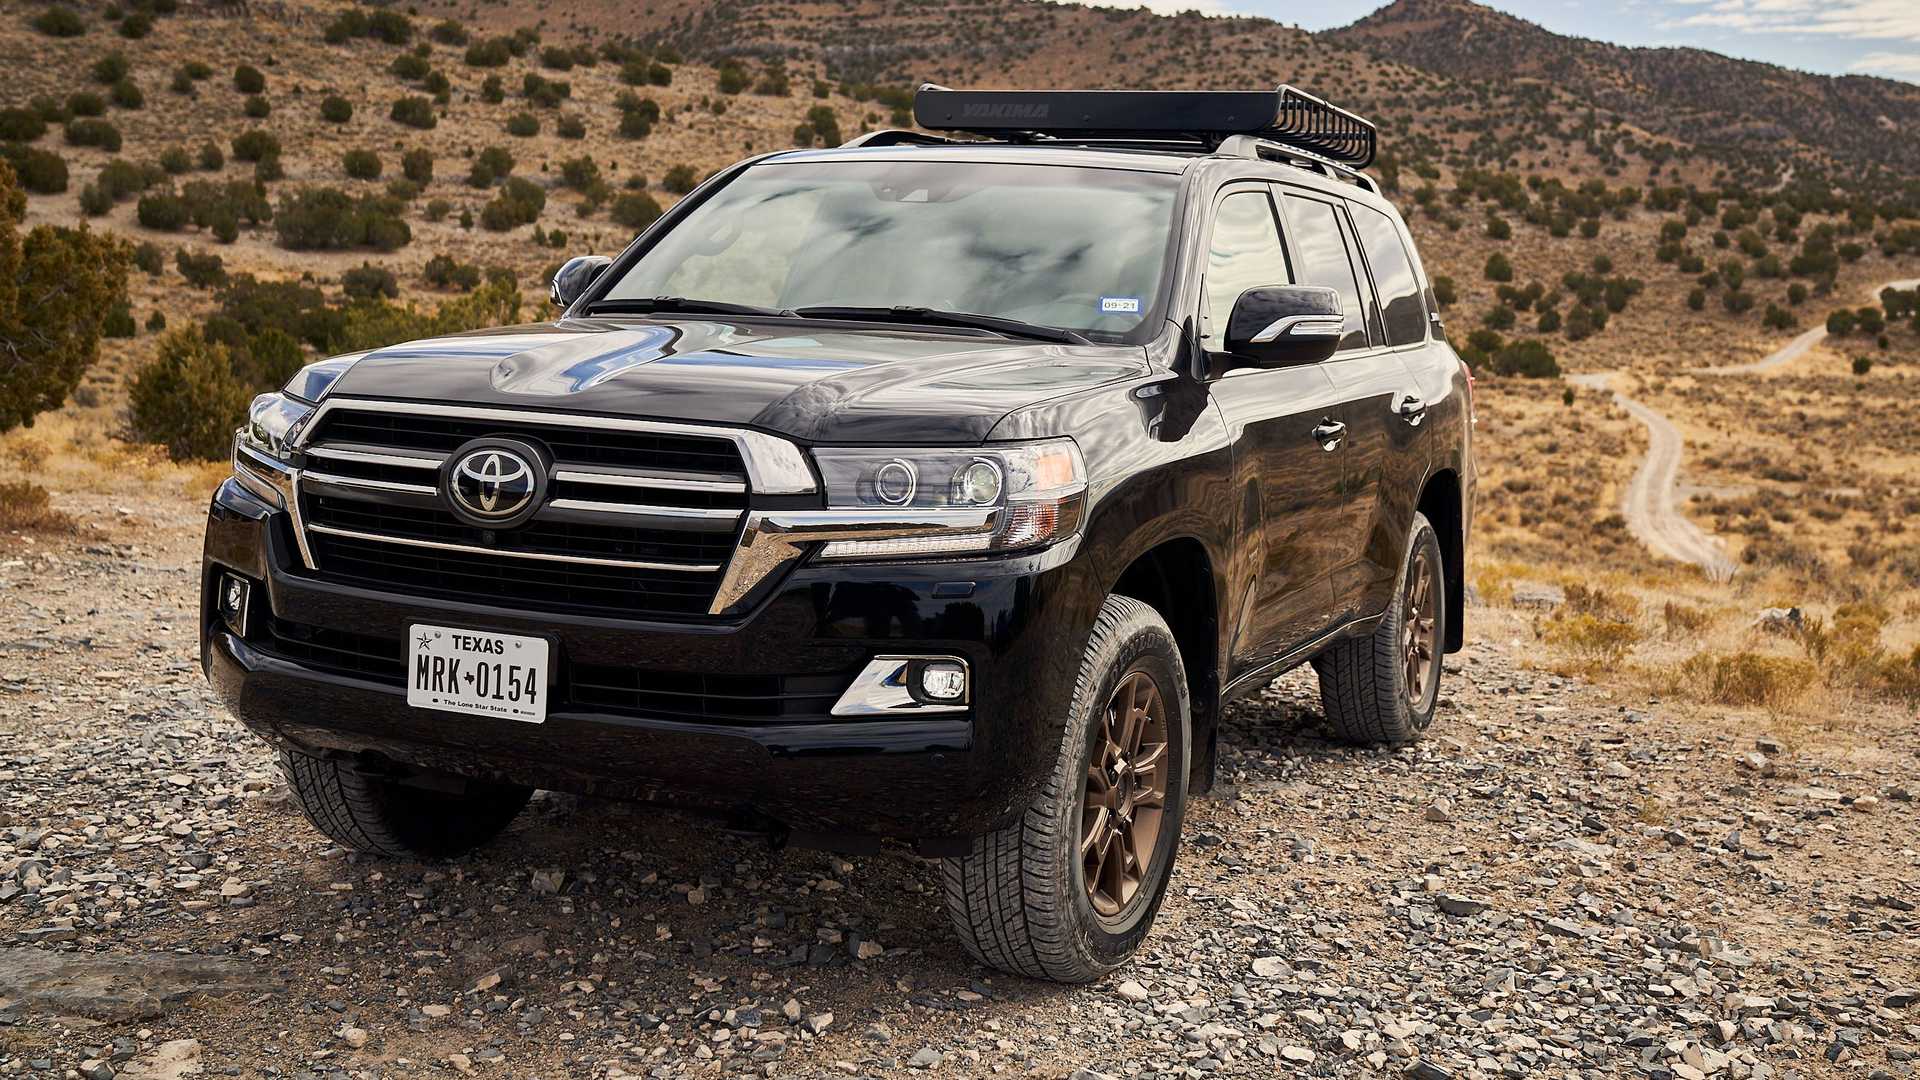 New Toyota Land Cruiser To Debut In April 2021: Report